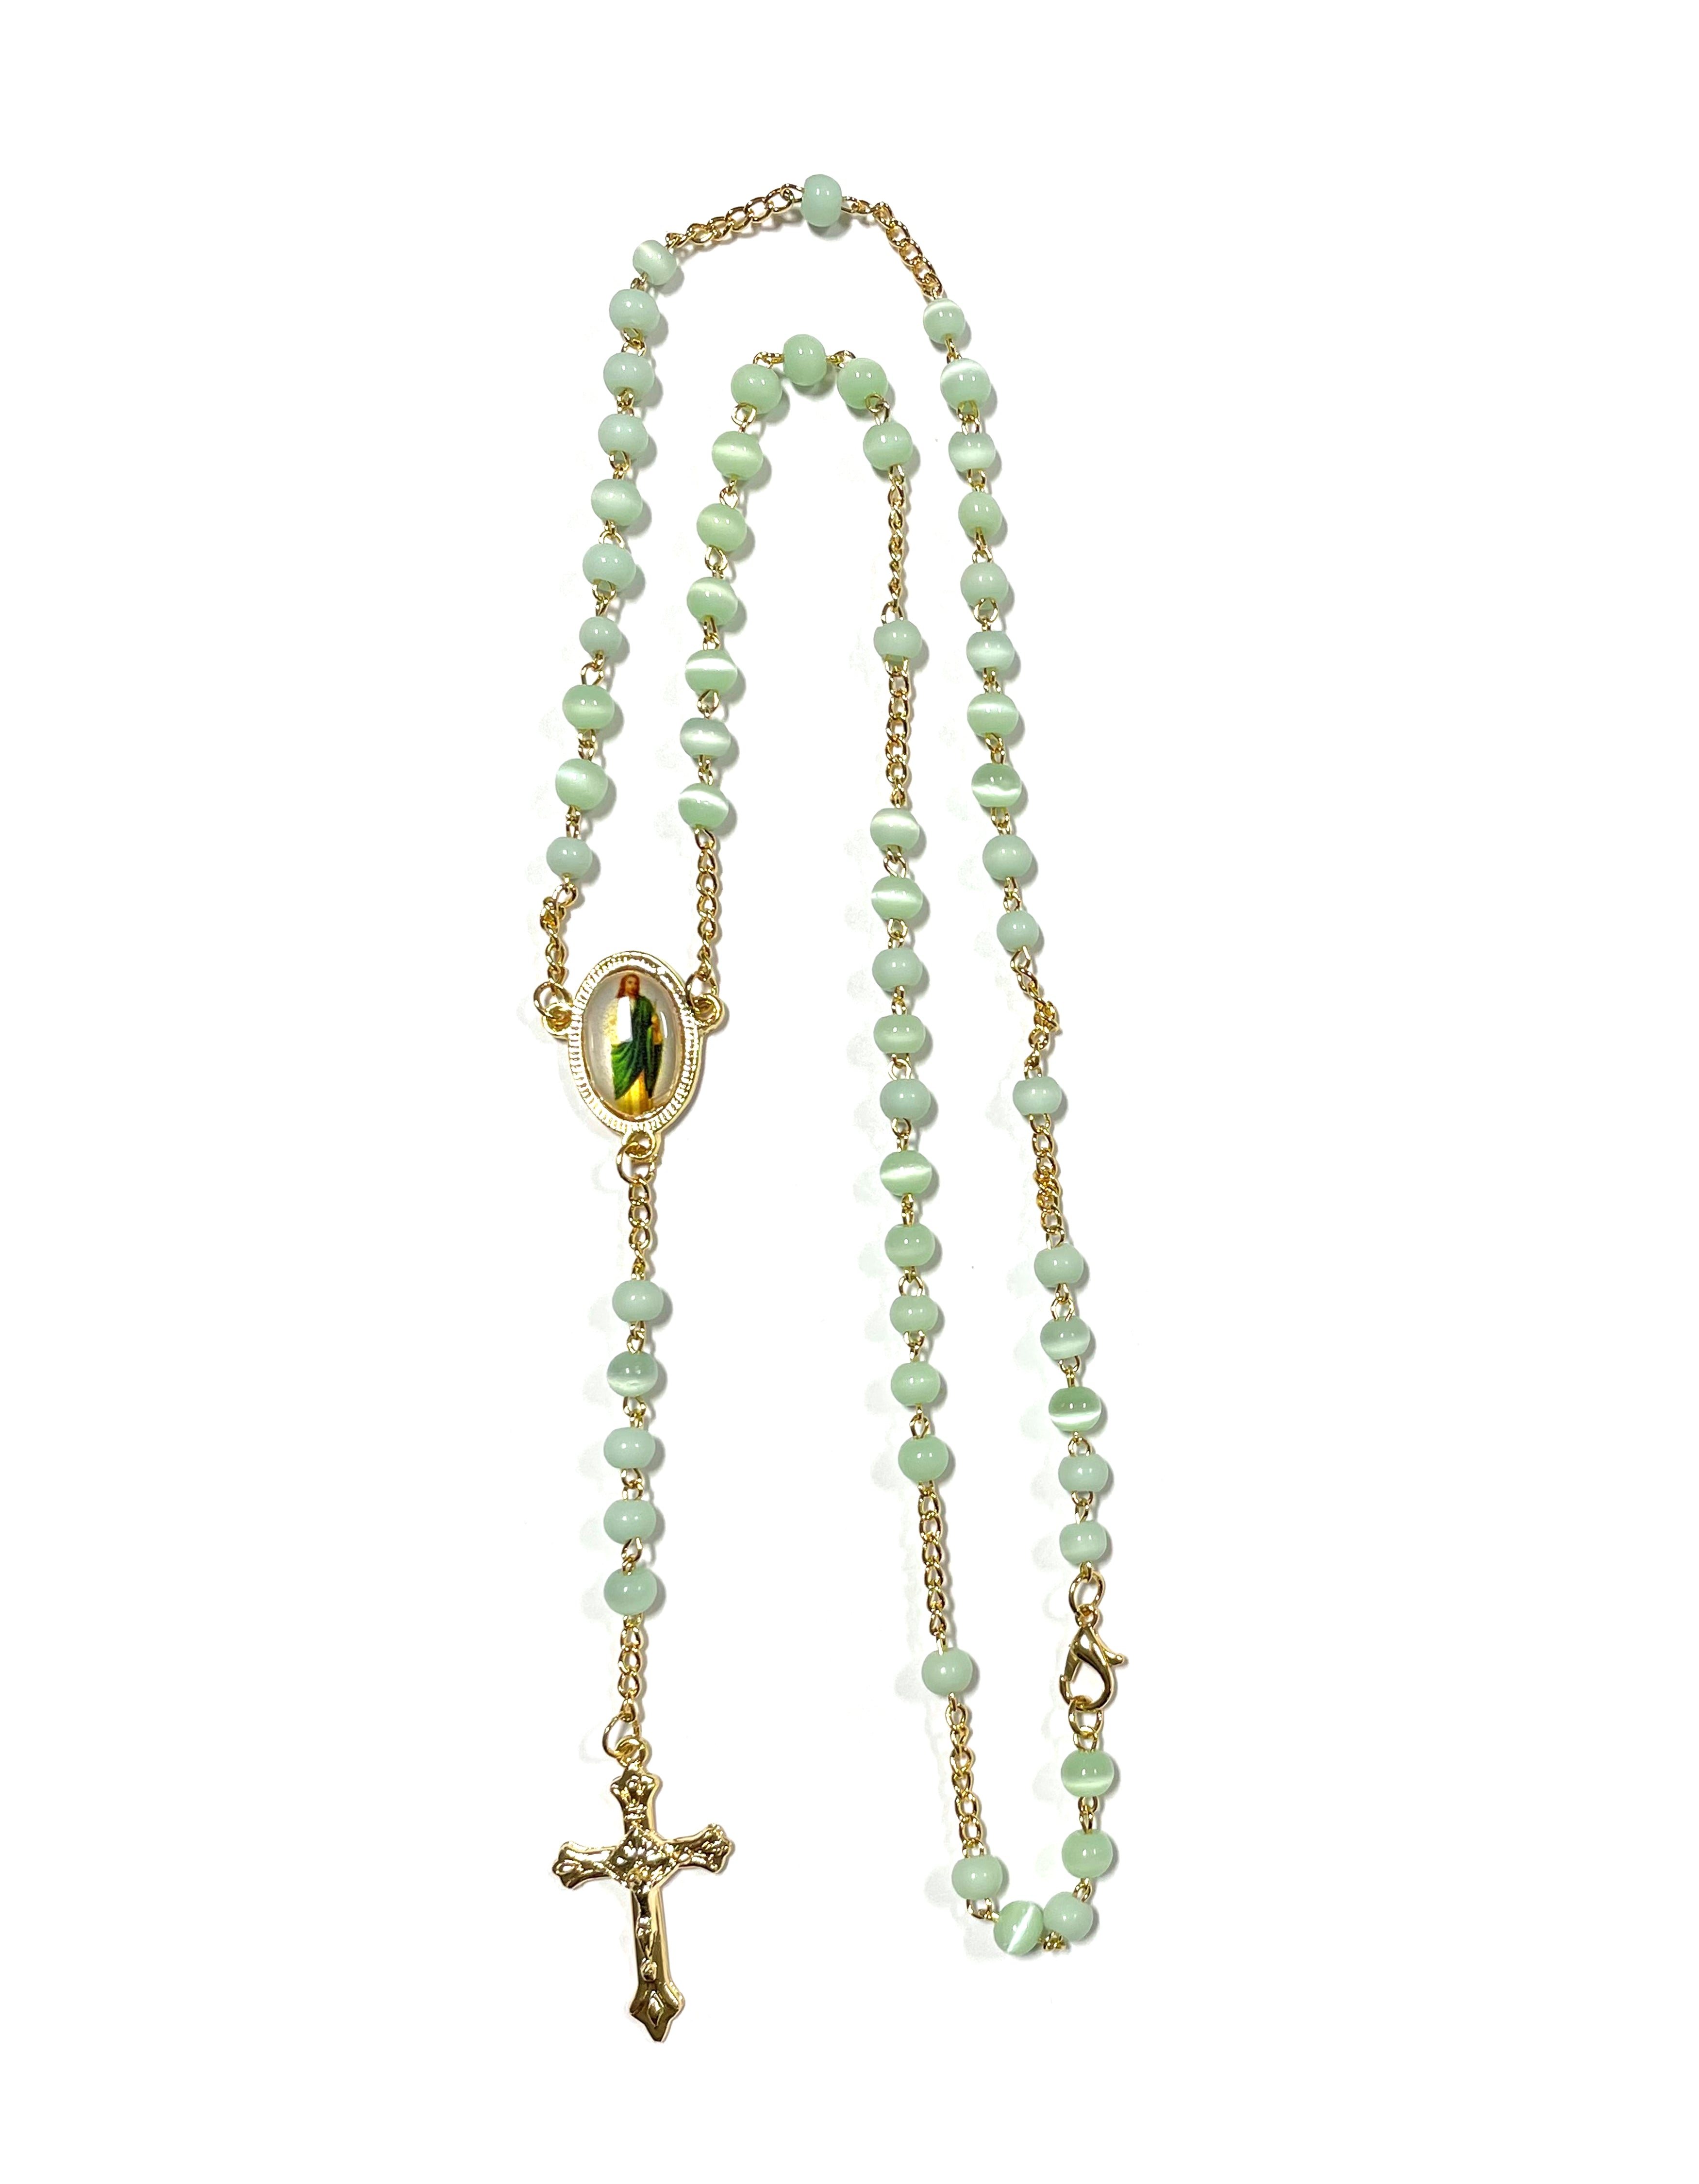 Gold and green Saint Jude rosary with Cat's Eye beads